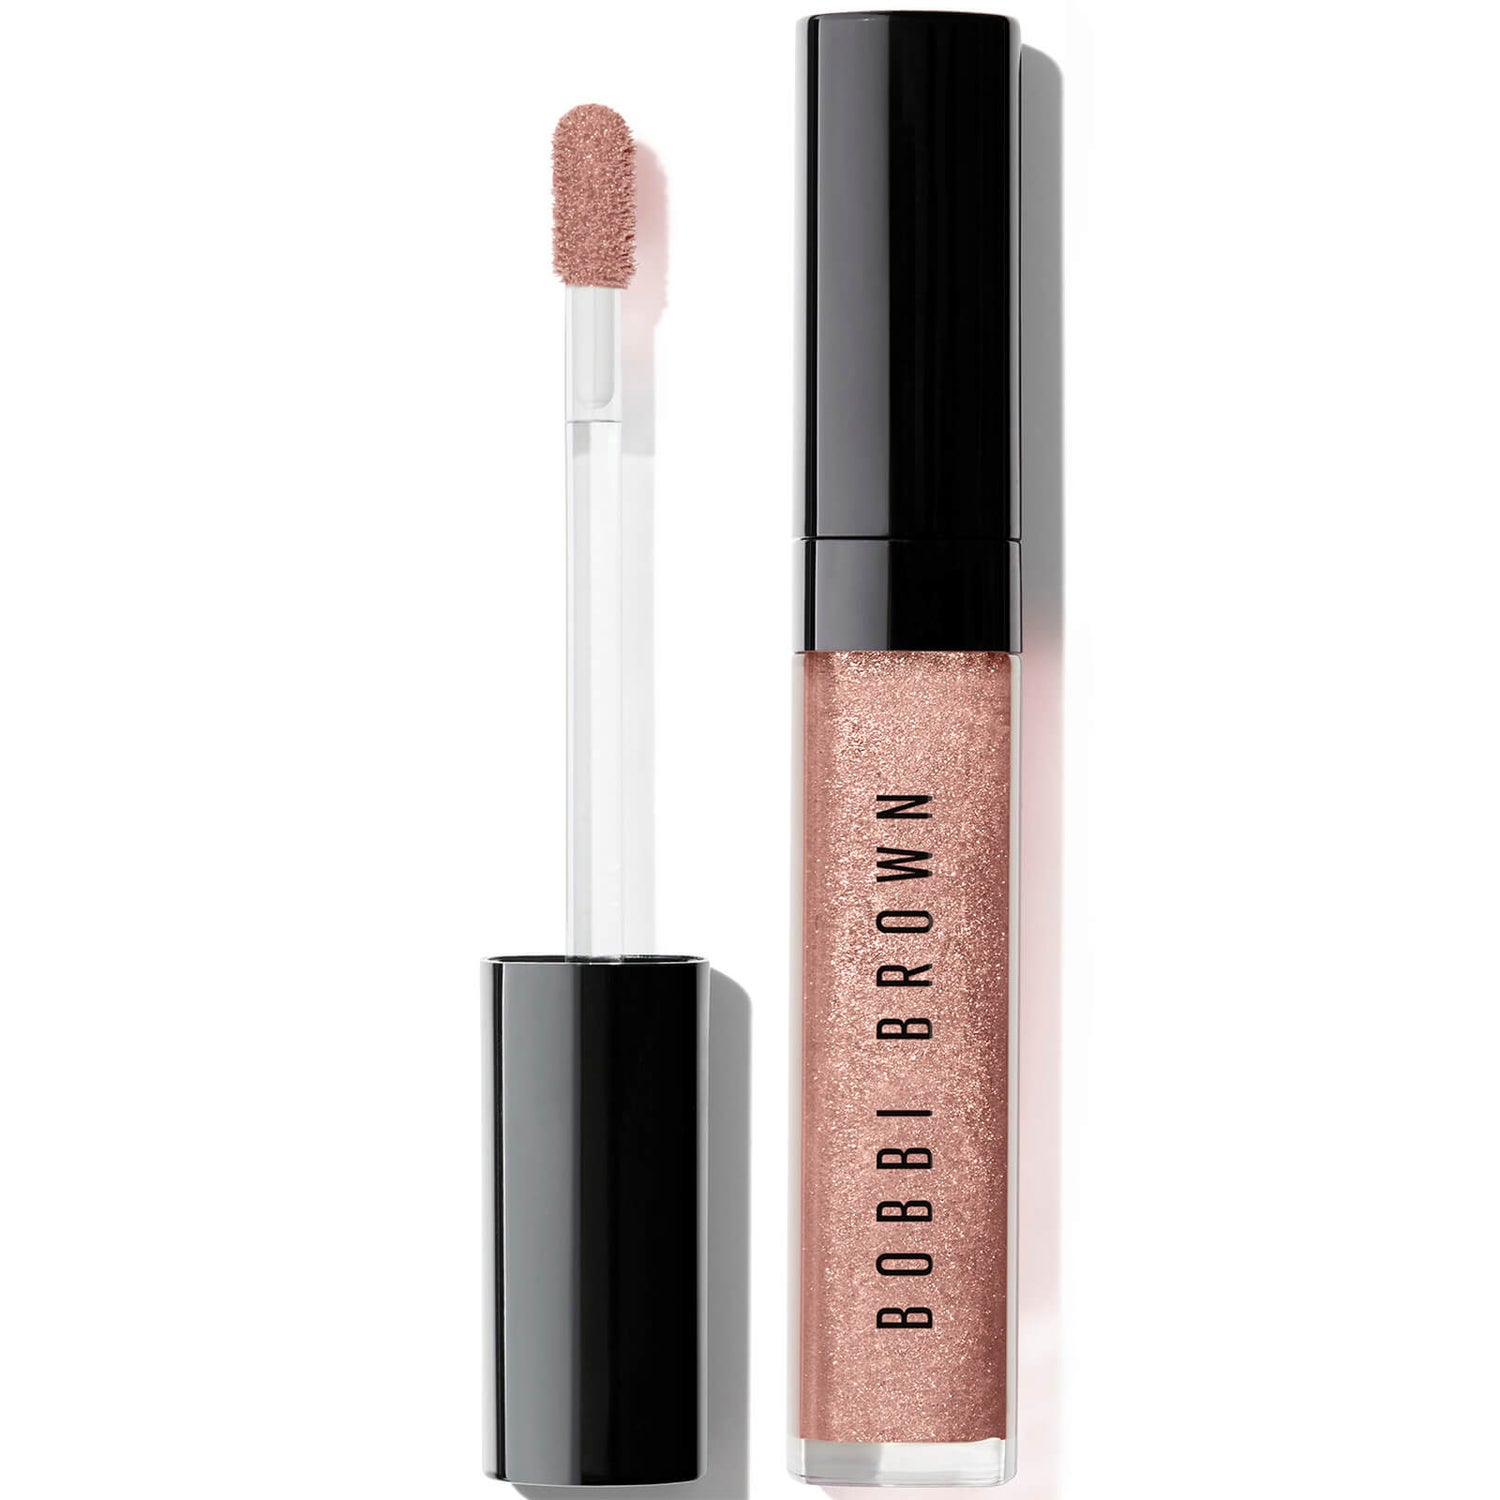 Bobbi Brown Crushed Oil Infused Gloss Shimmer 10g (Various Shades)